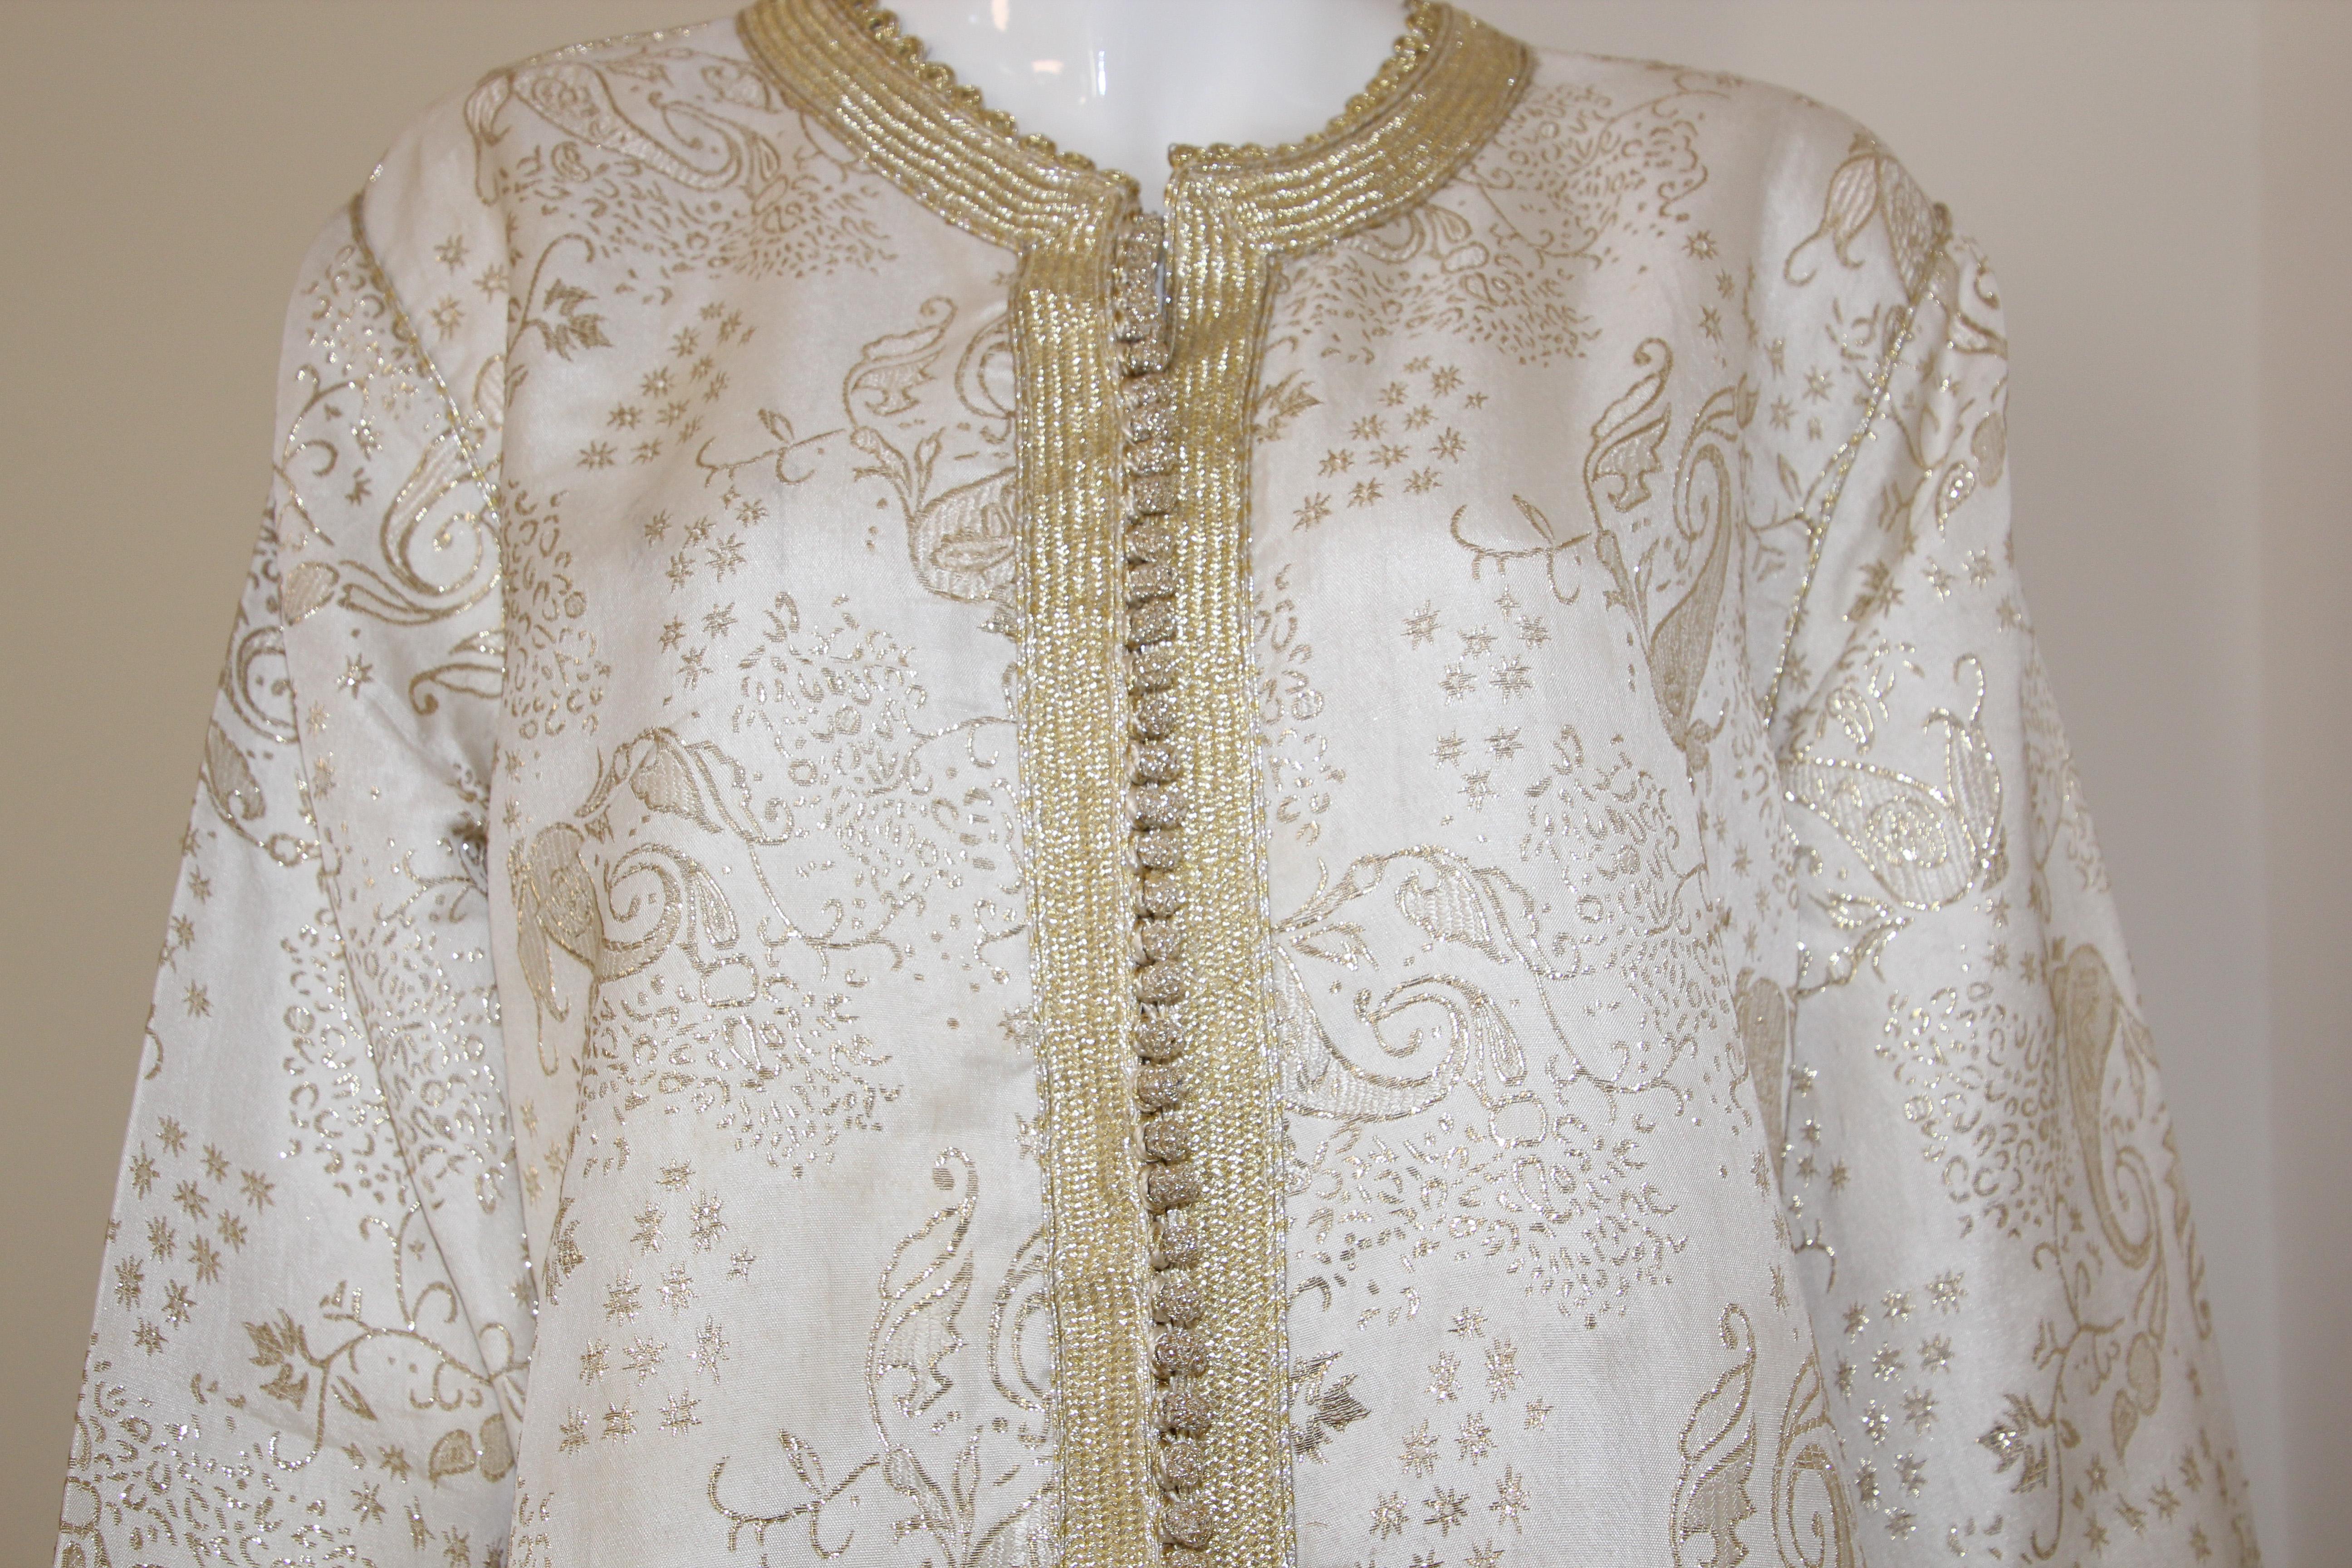 Vintage Moroccan White Kaftan with Gold Metallic Floral Brocade For Sale 7